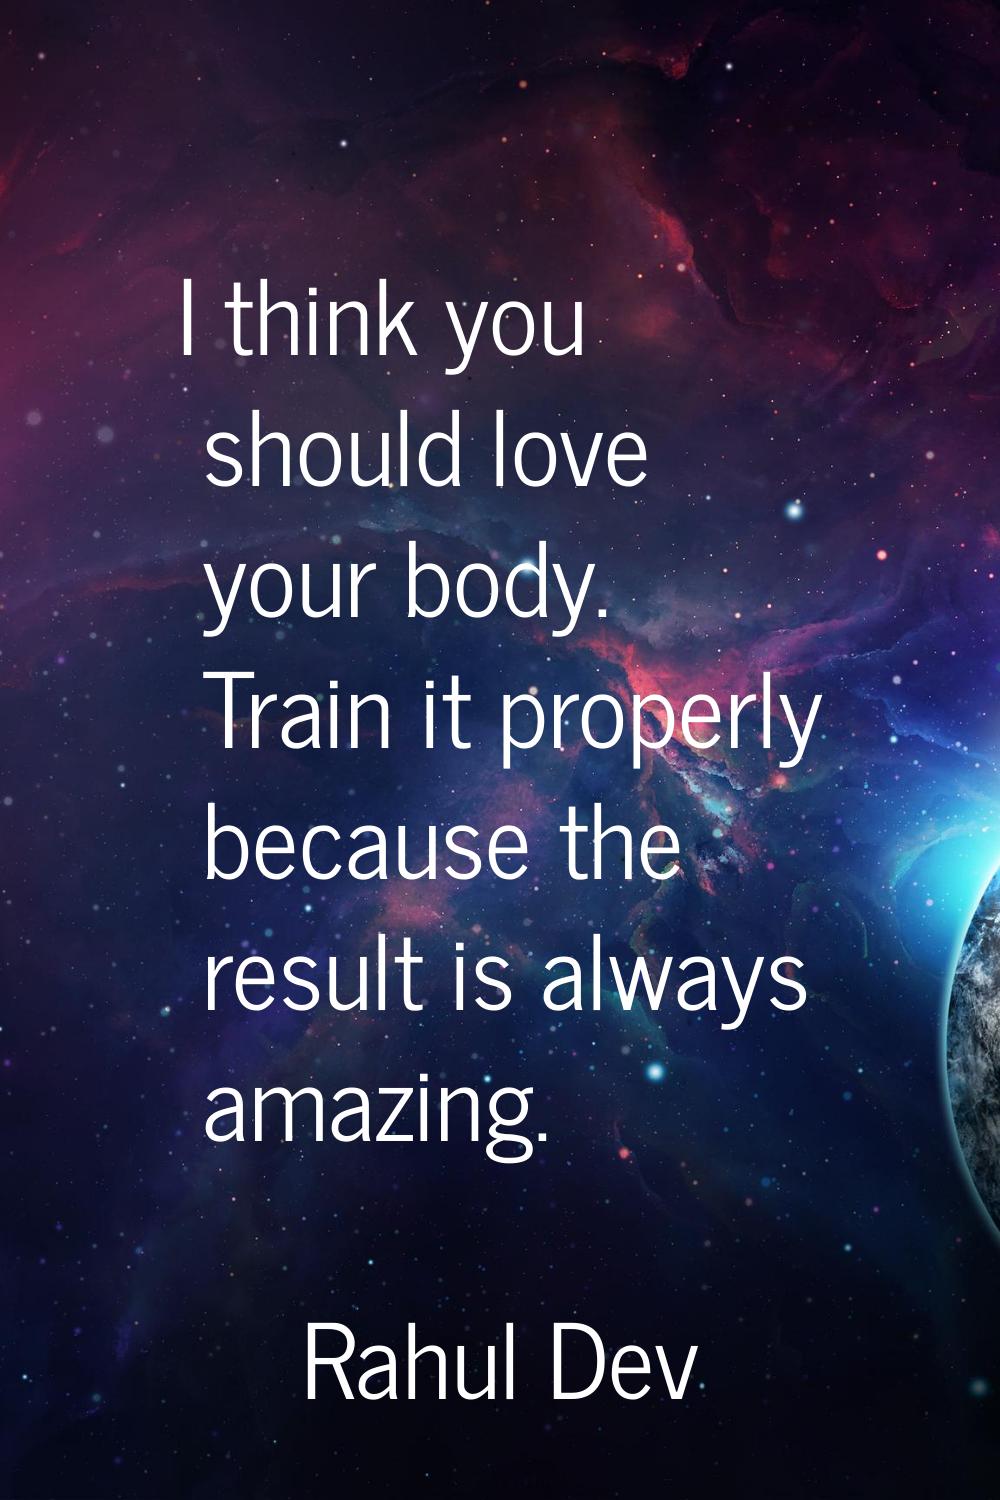 I think you should love your body. Train it properly because the result is always amazing.